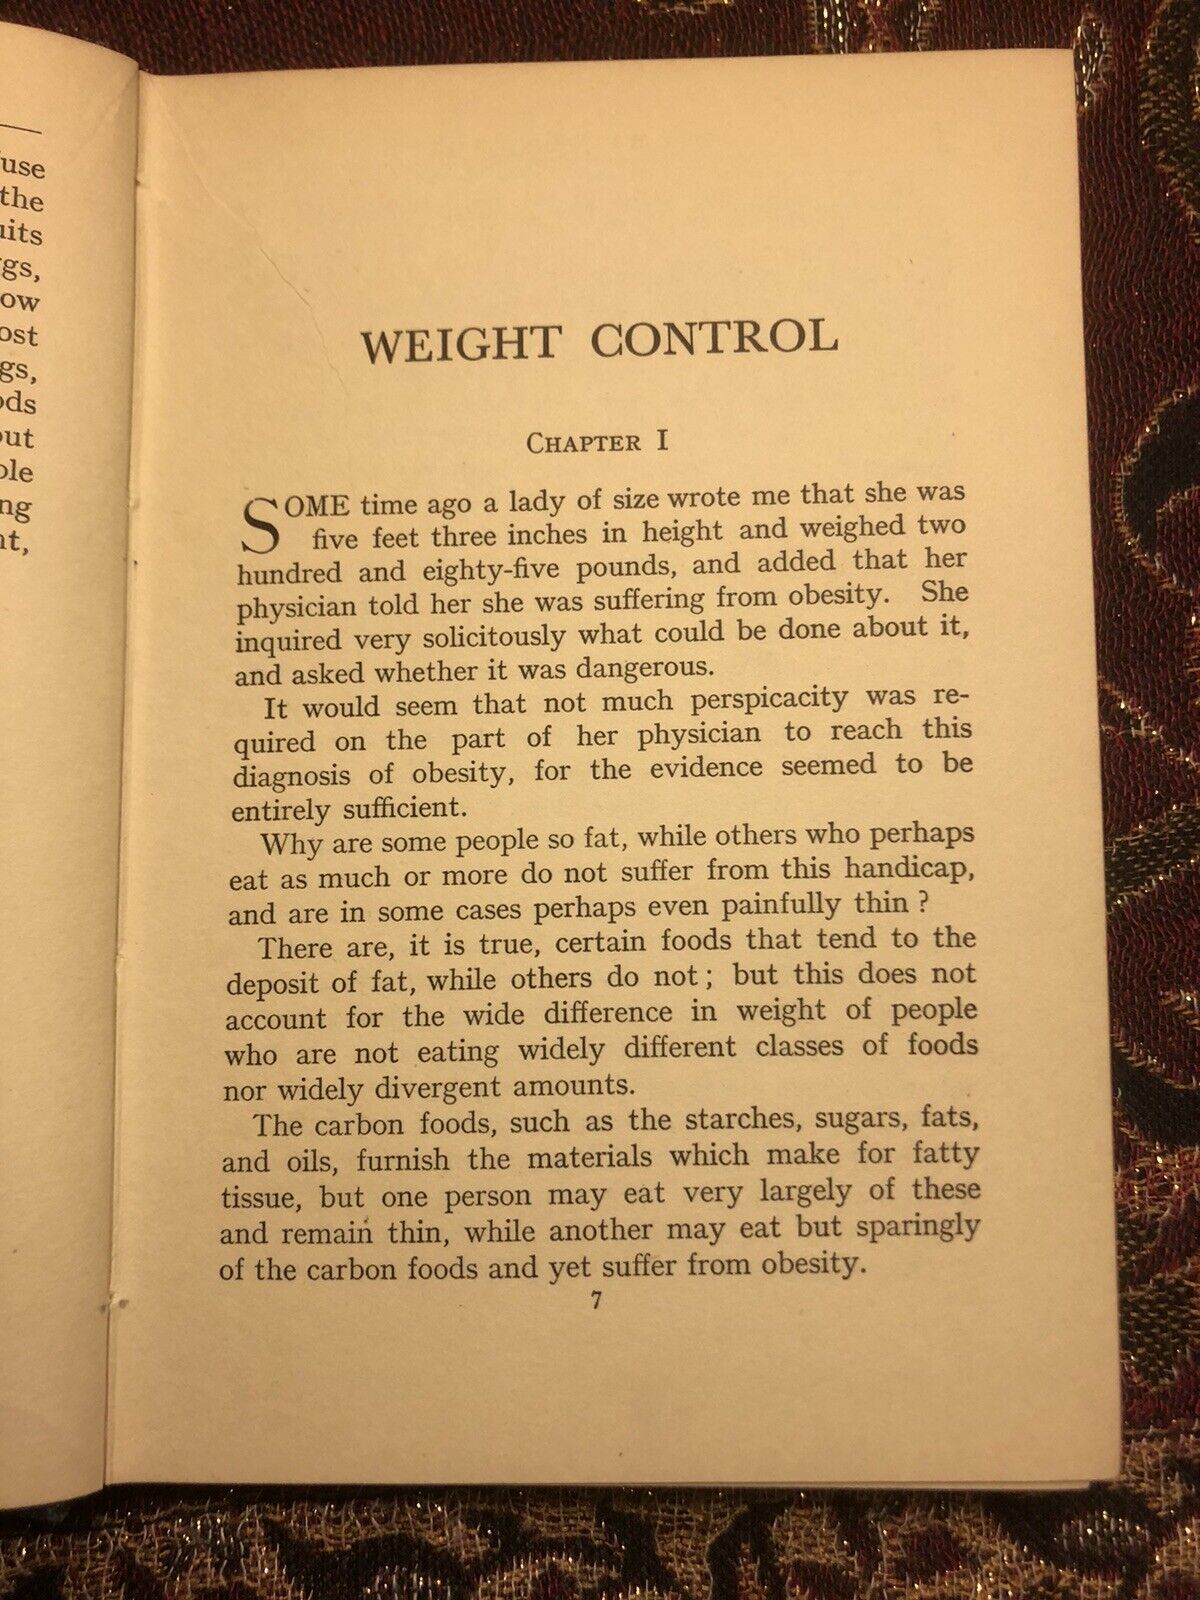 1936 Weight Control : Howard Hay : Early Dieting Health Book / Diet Weight Loss